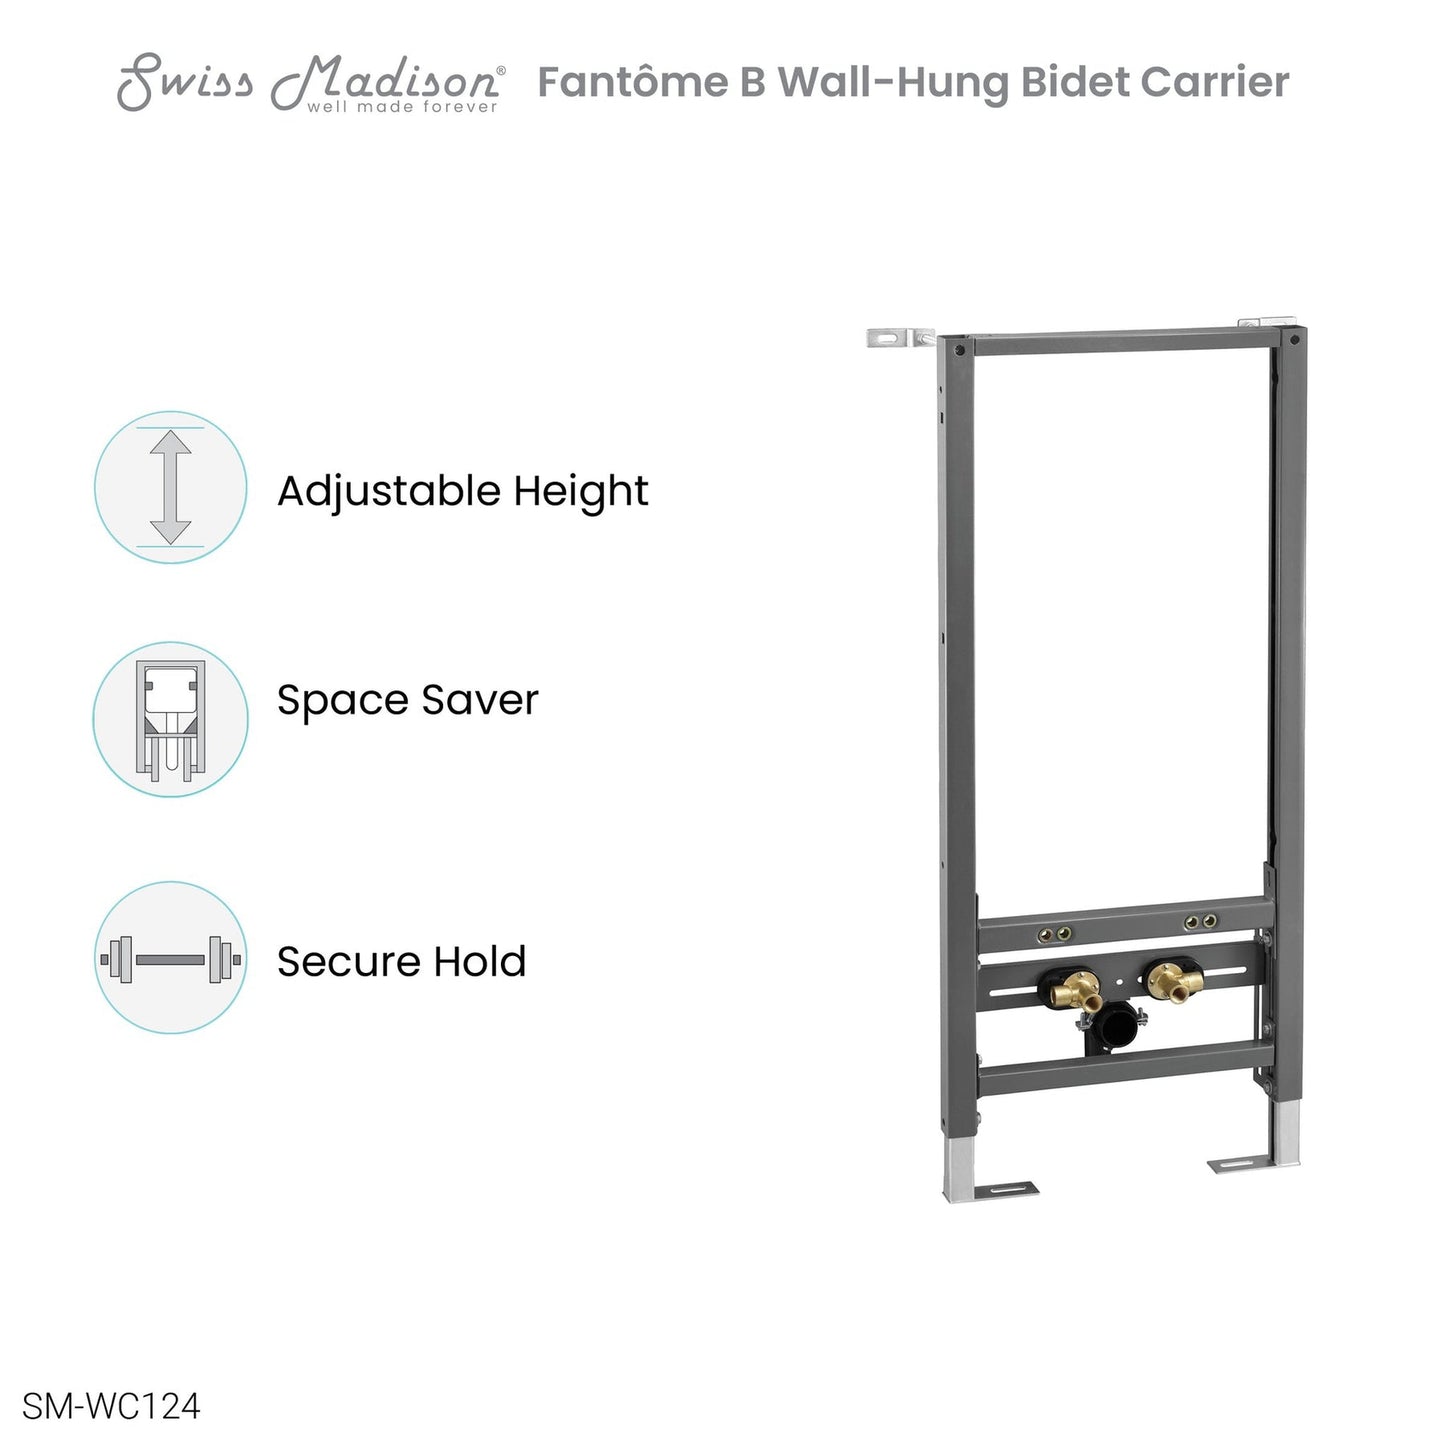 Swiss Madison Fantôme B 2" x 4" and 2" x "6 Steel Frame In-Wall Bidet Carrier System For Wall-Hung Bidet